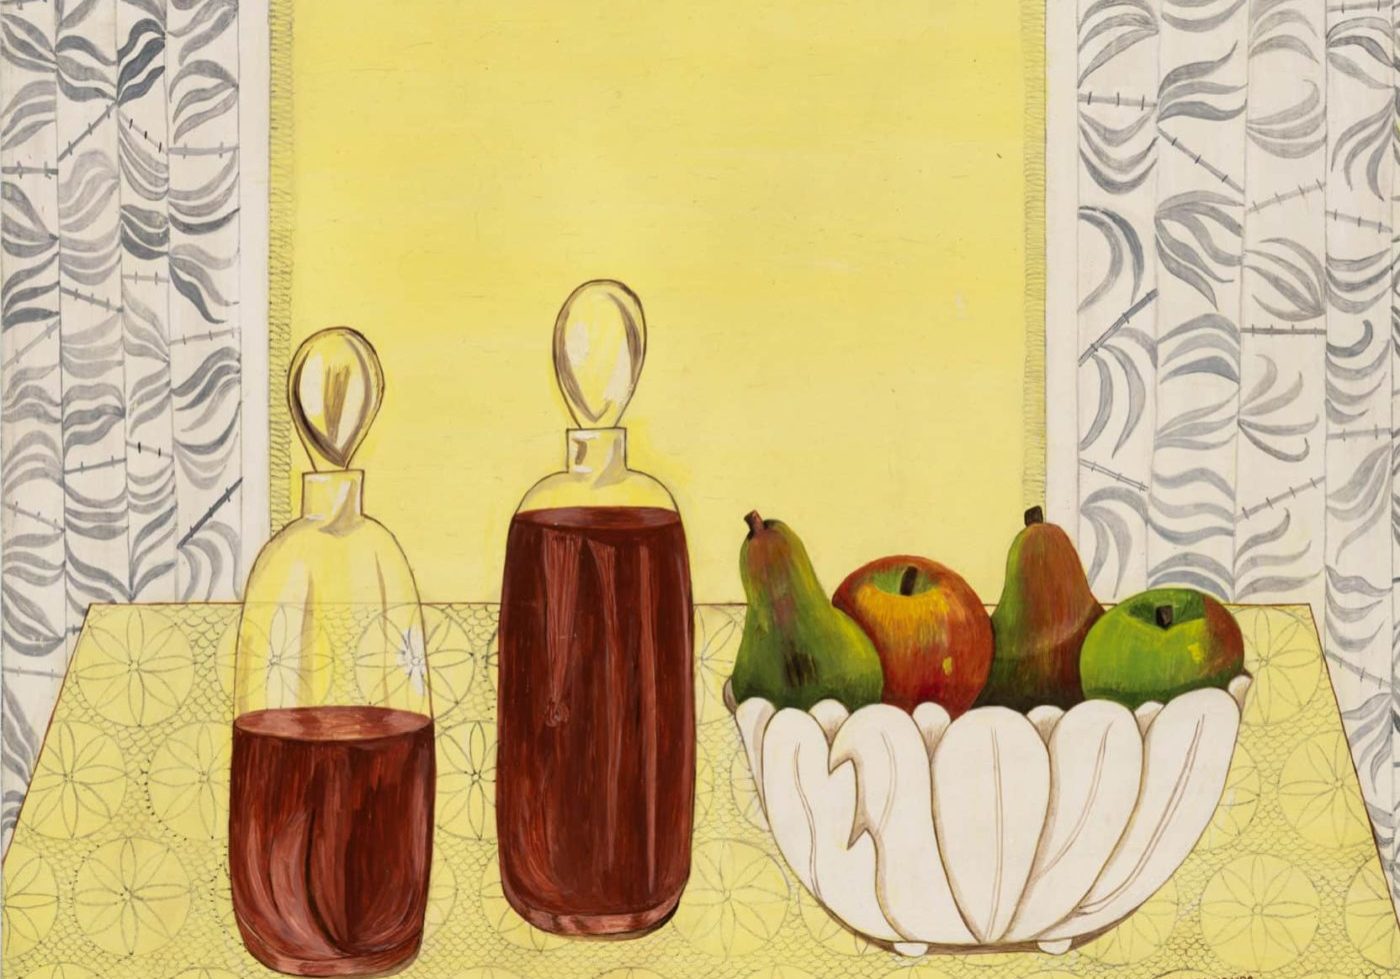 <b>Sophy Regensburg (1885-1974)<b/></br>
<i>Decanters with Pears in Bowl, </i>1967</br>
Casein on canvas</br>
20 x 24 inches (51 x 61 cm) </br>
Collection of the Stamford Museum & Nature Center</br>
Gift of Mr. Charles Regensburg, 87.9.1</br>
